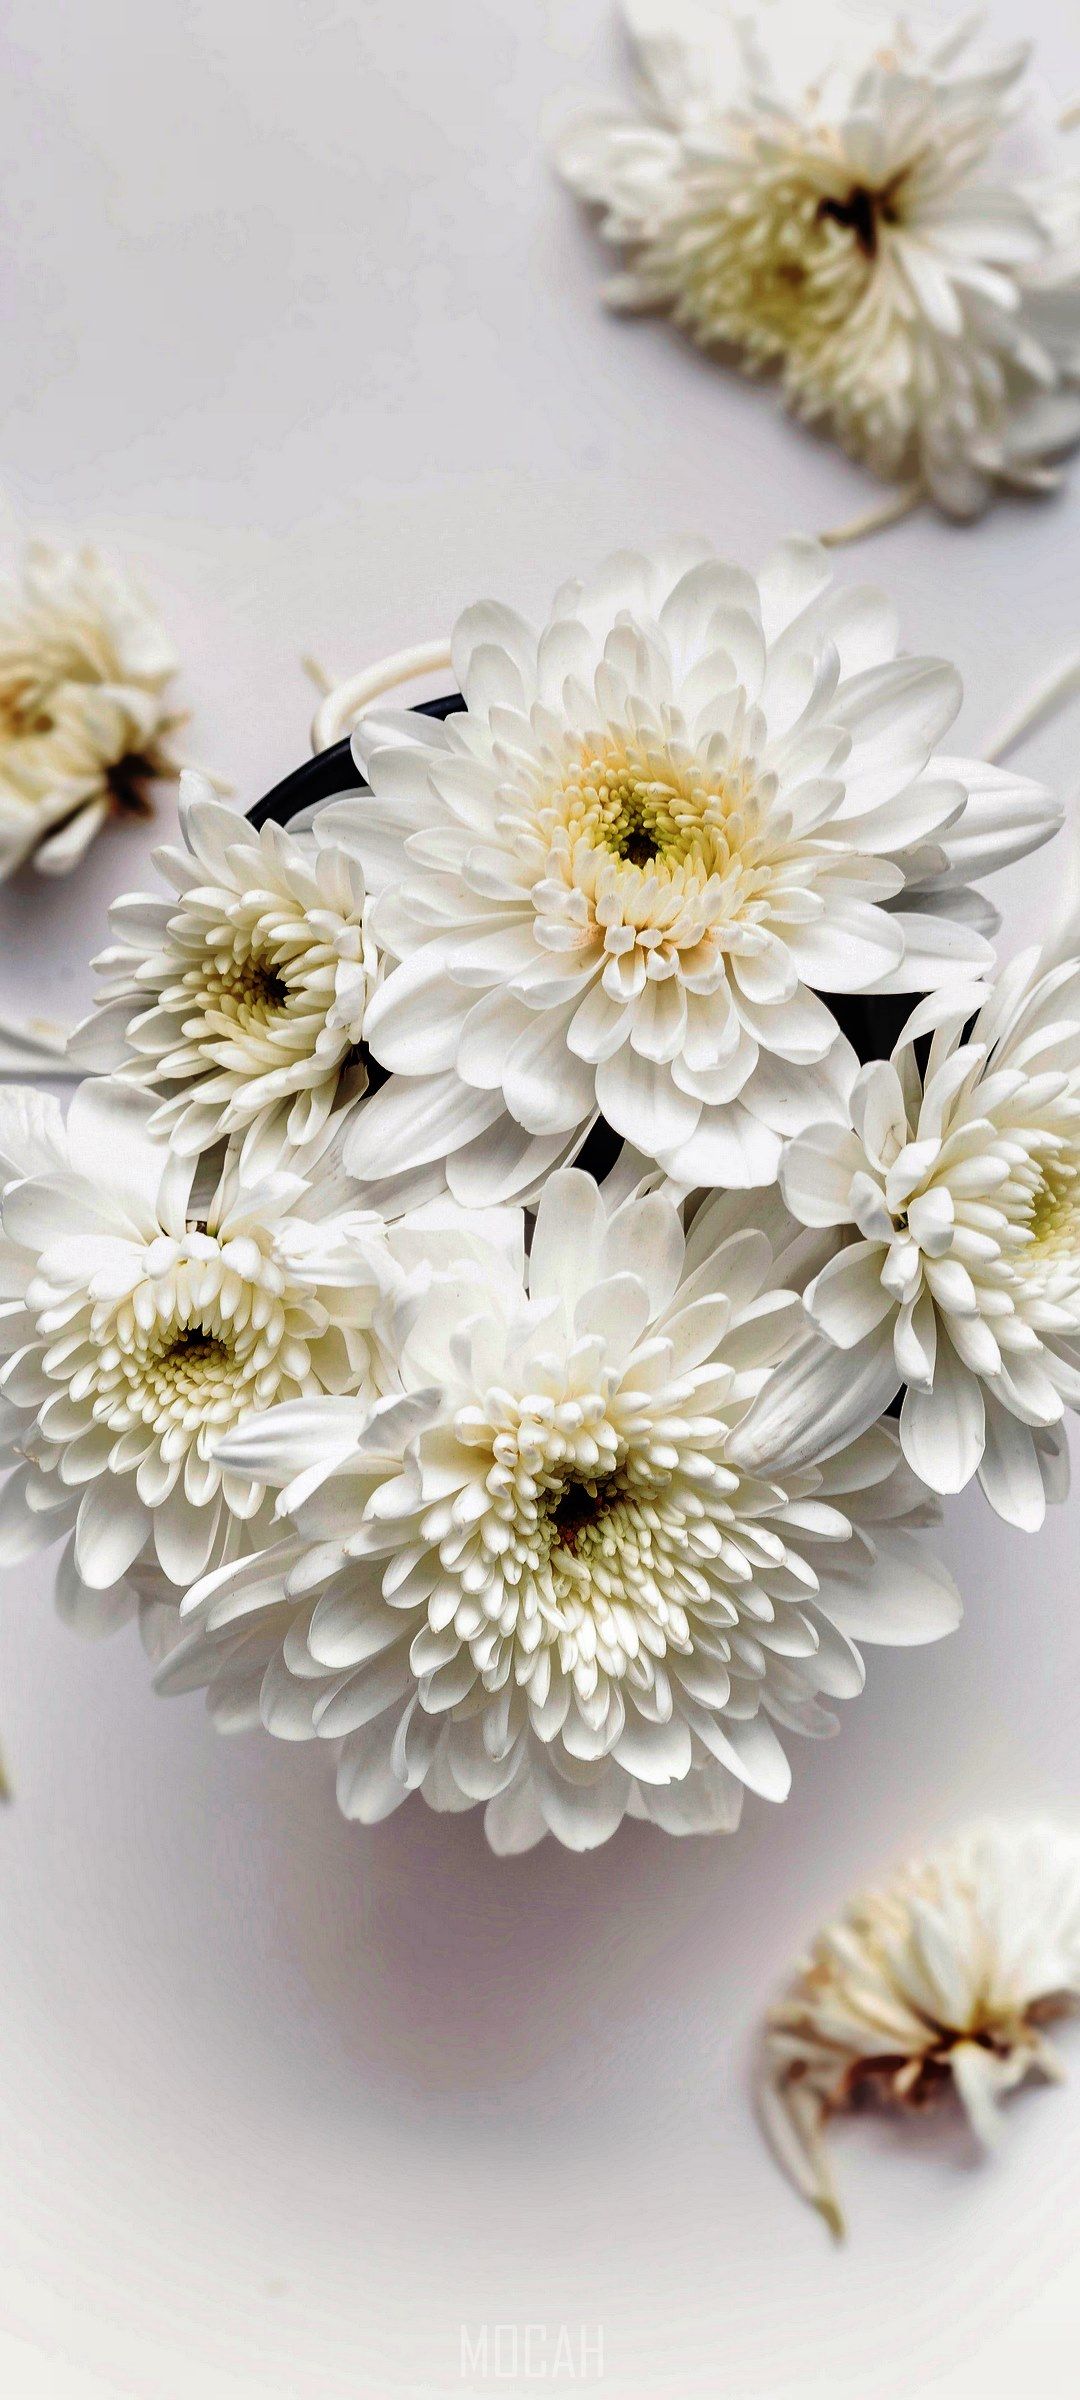 A white flowers wallpaper for iPhone with white flowers on a white background - Peace